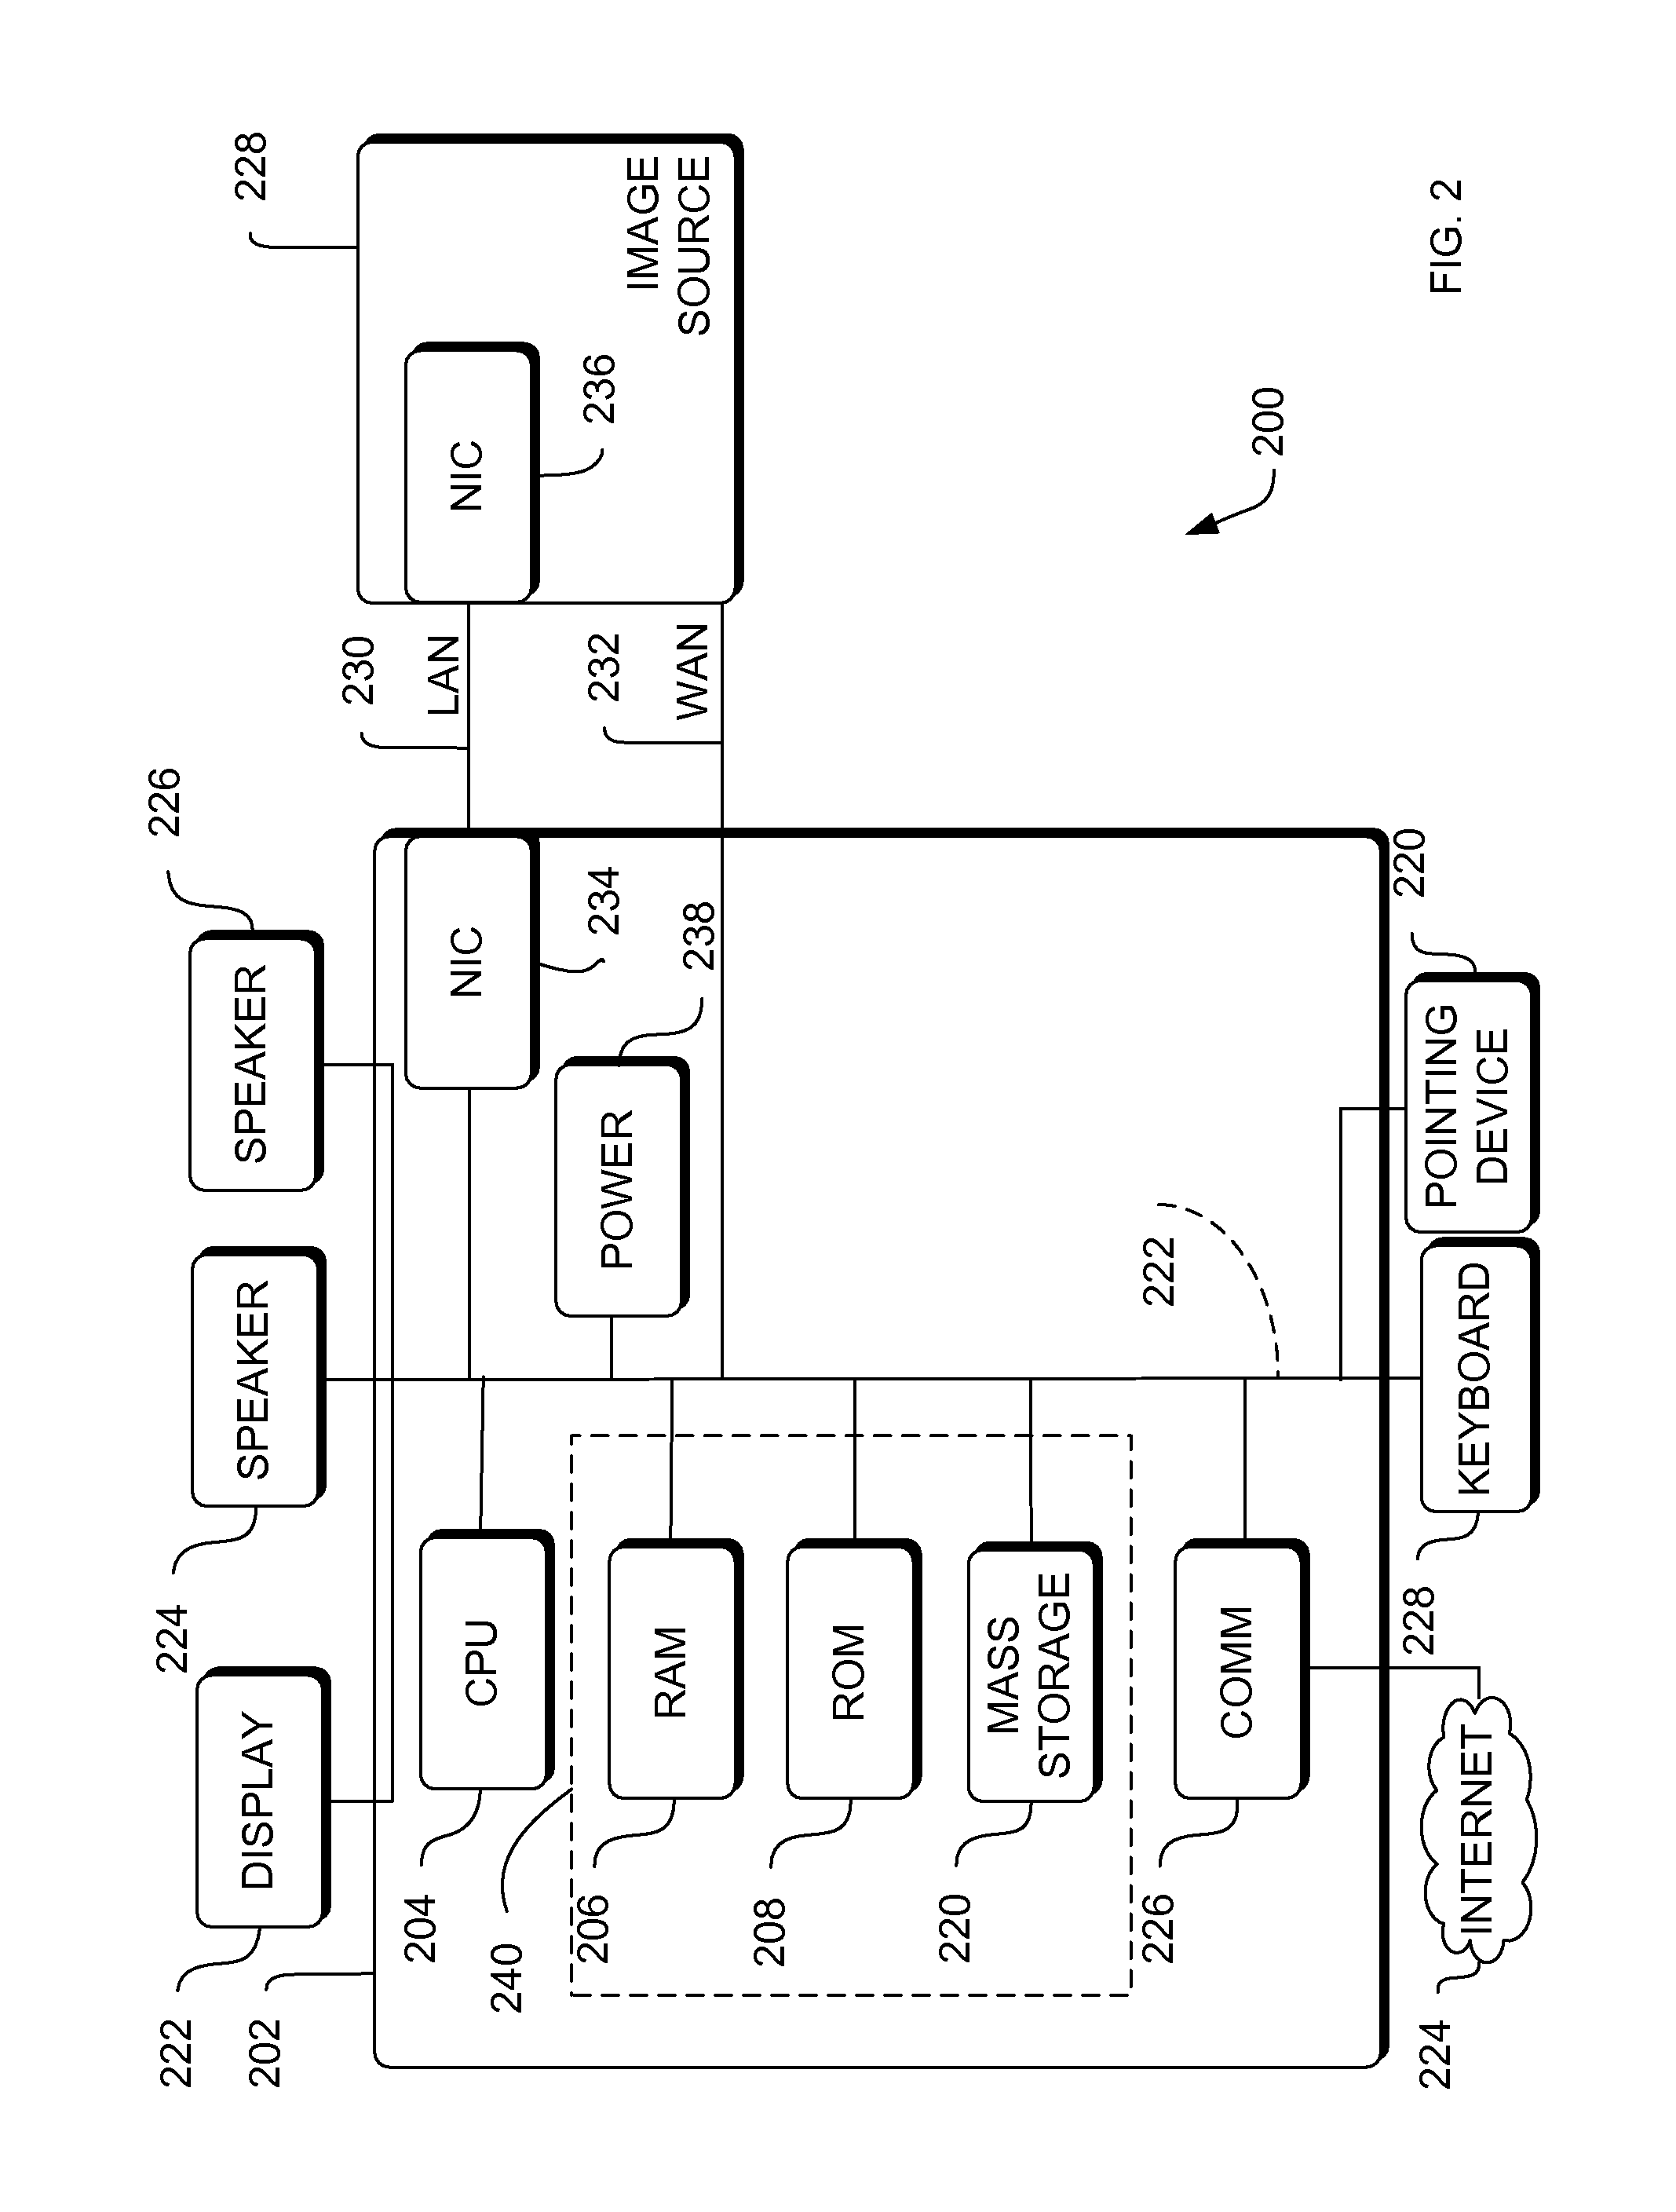 System and method for flattened anatomy for interactive segmentation and measurement